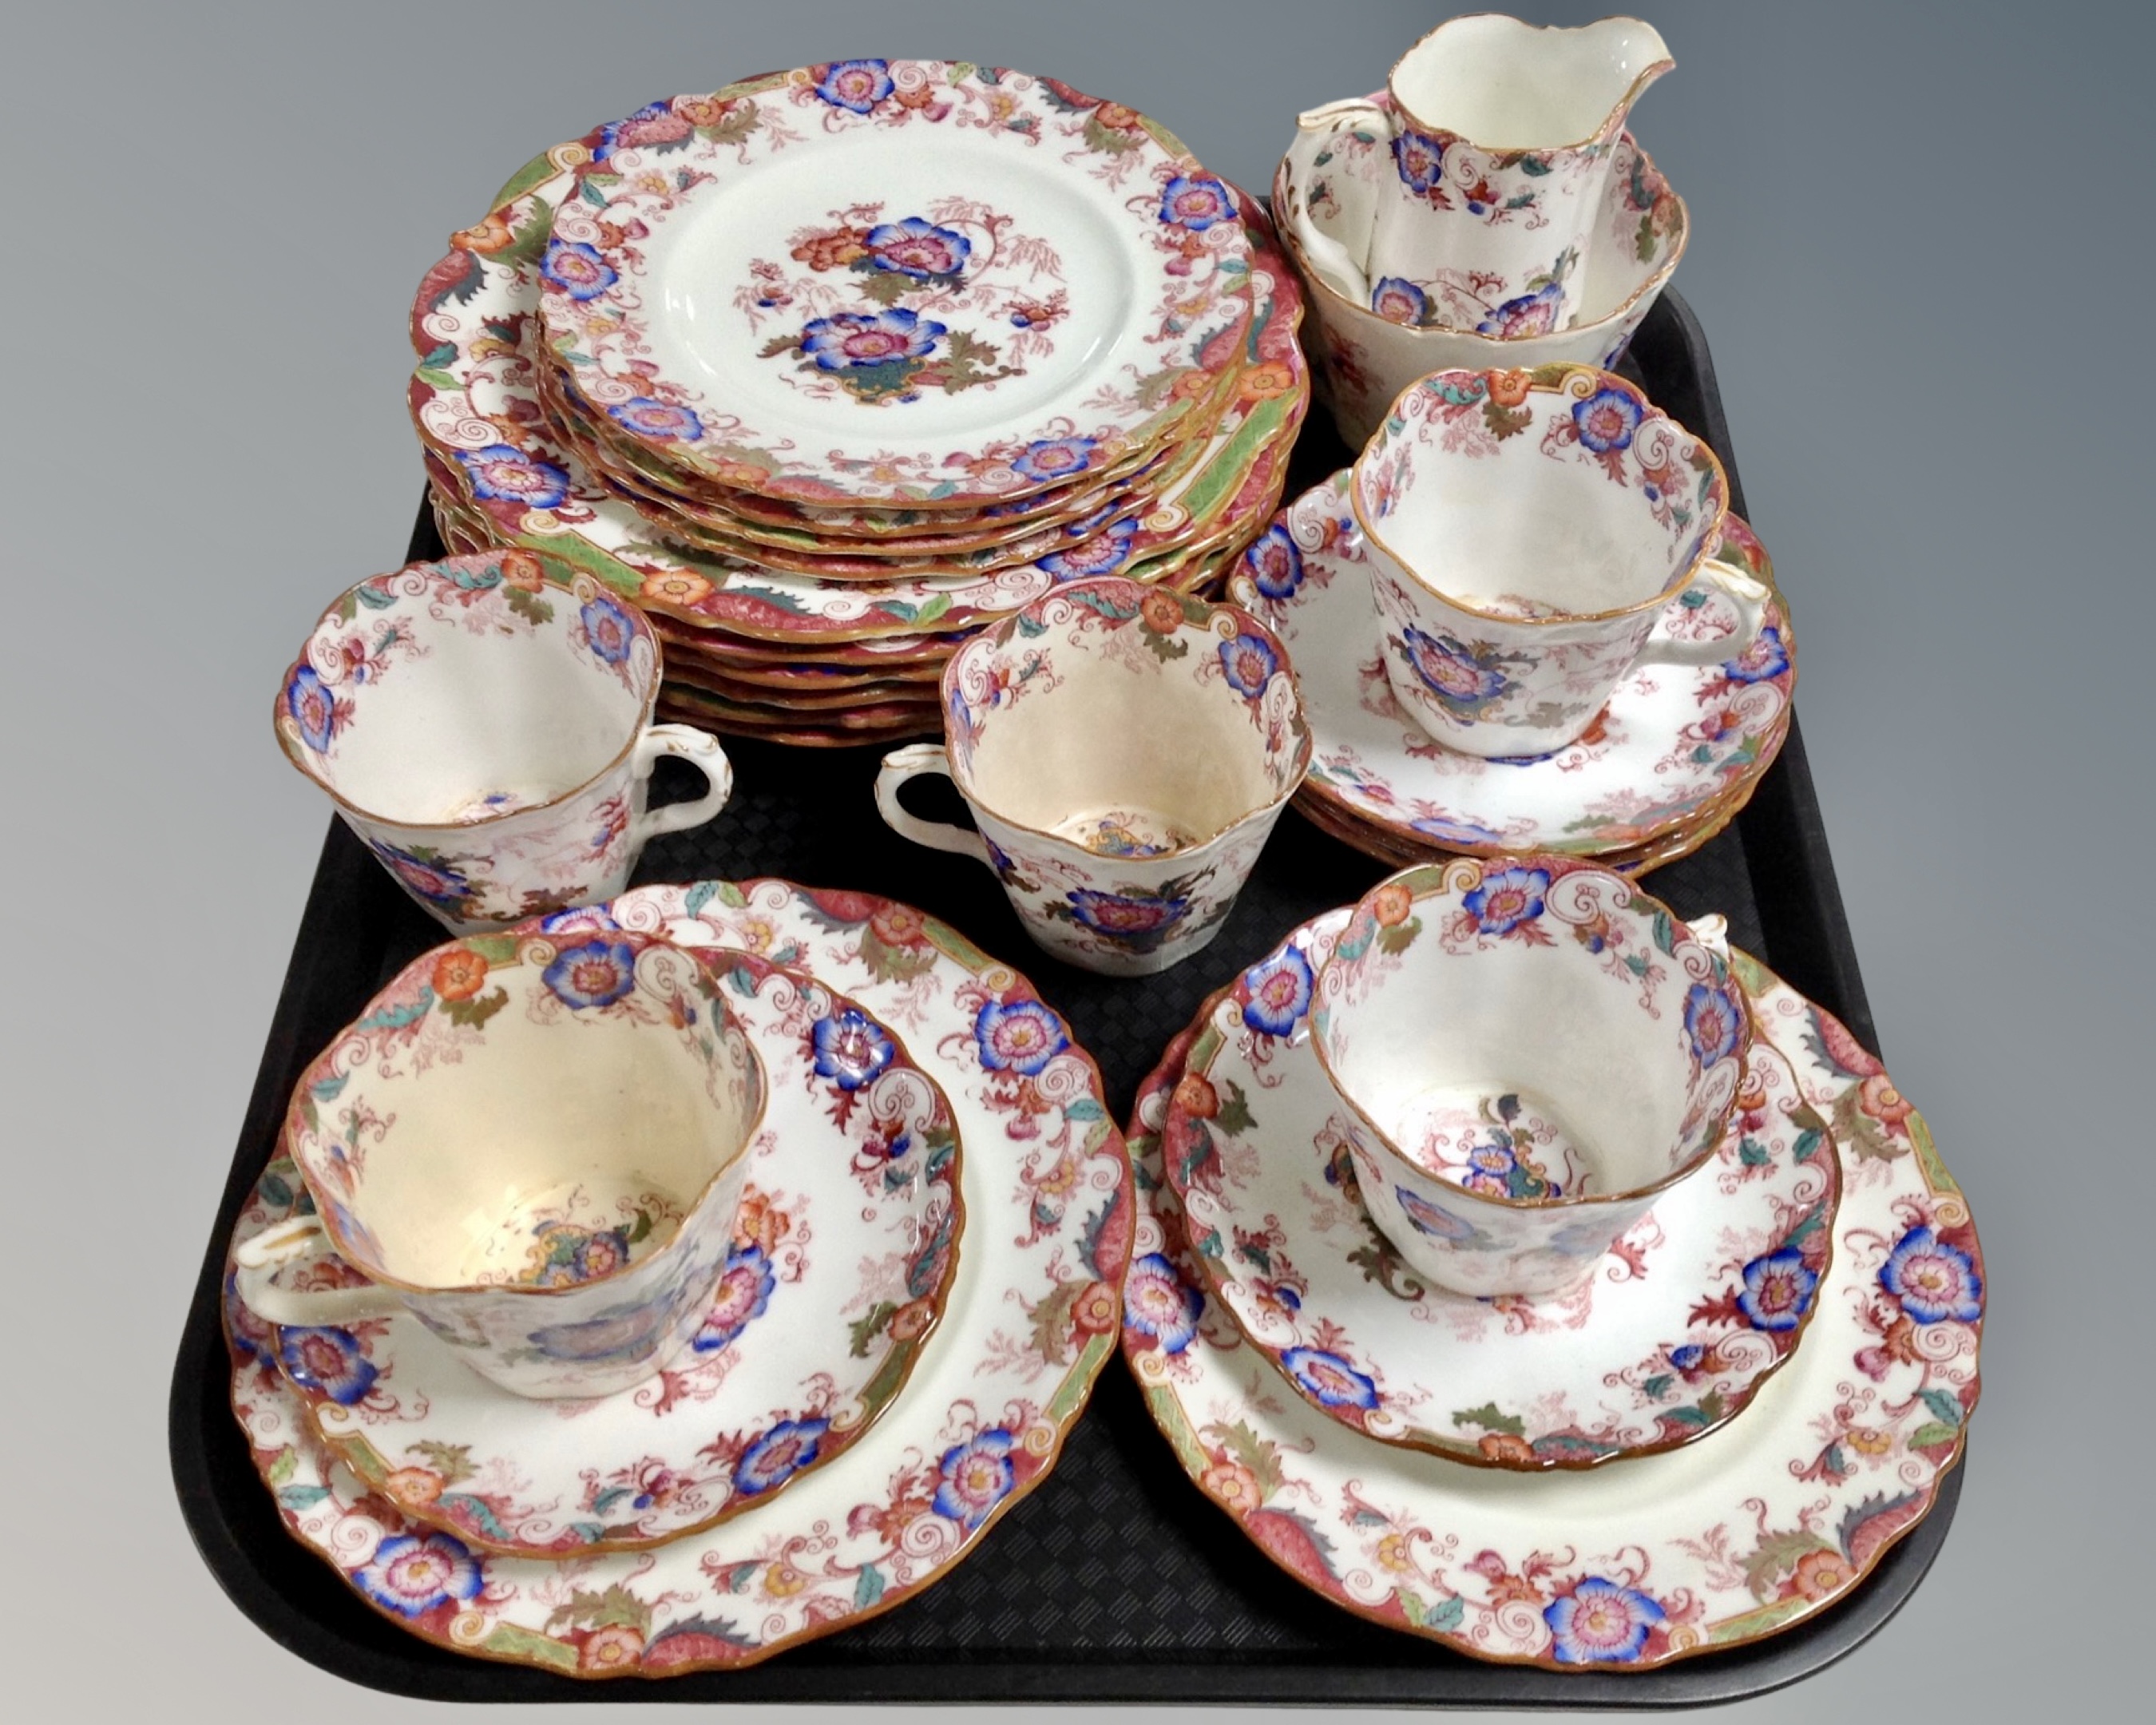 A tray of approximately 24 pieces of Cauldon tea china.